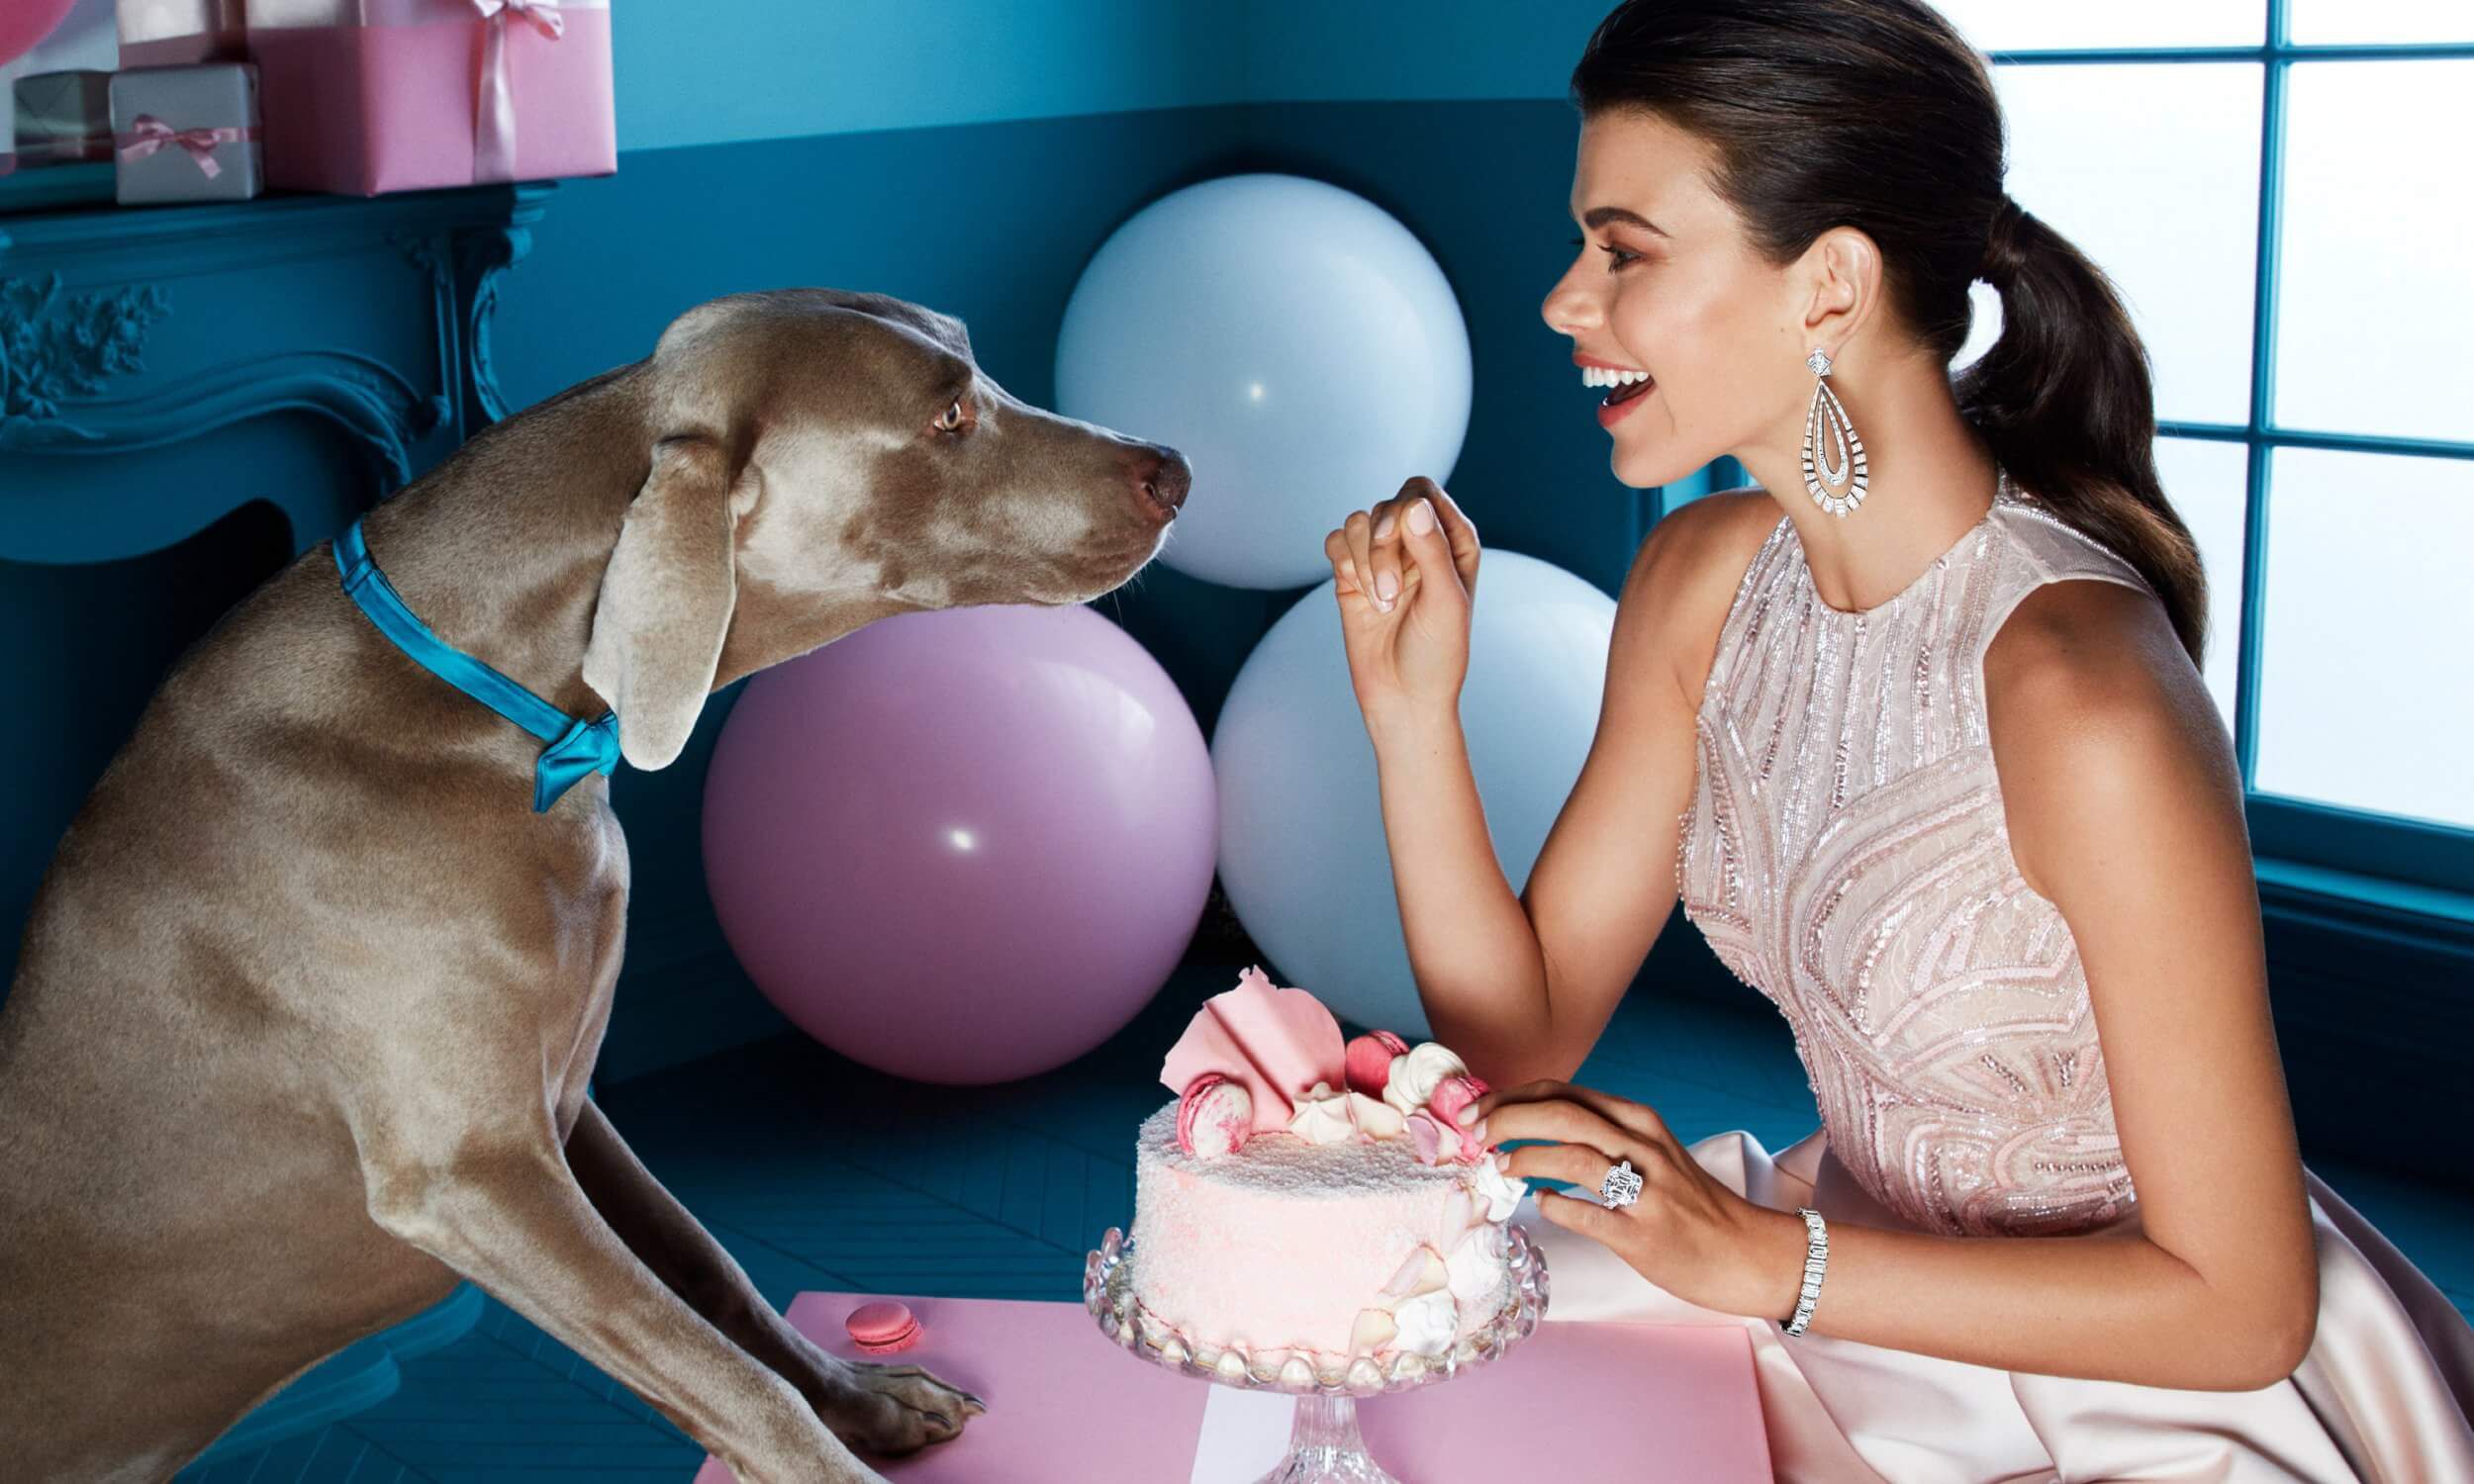 A lady wearing an embroidered pink dress with baguette cut diamond earrings, an emerald cut diamond bracelet and a 20.88 carat D Flawless emerald cut diamond ring sits opposite a dog wearing a blue bow tie